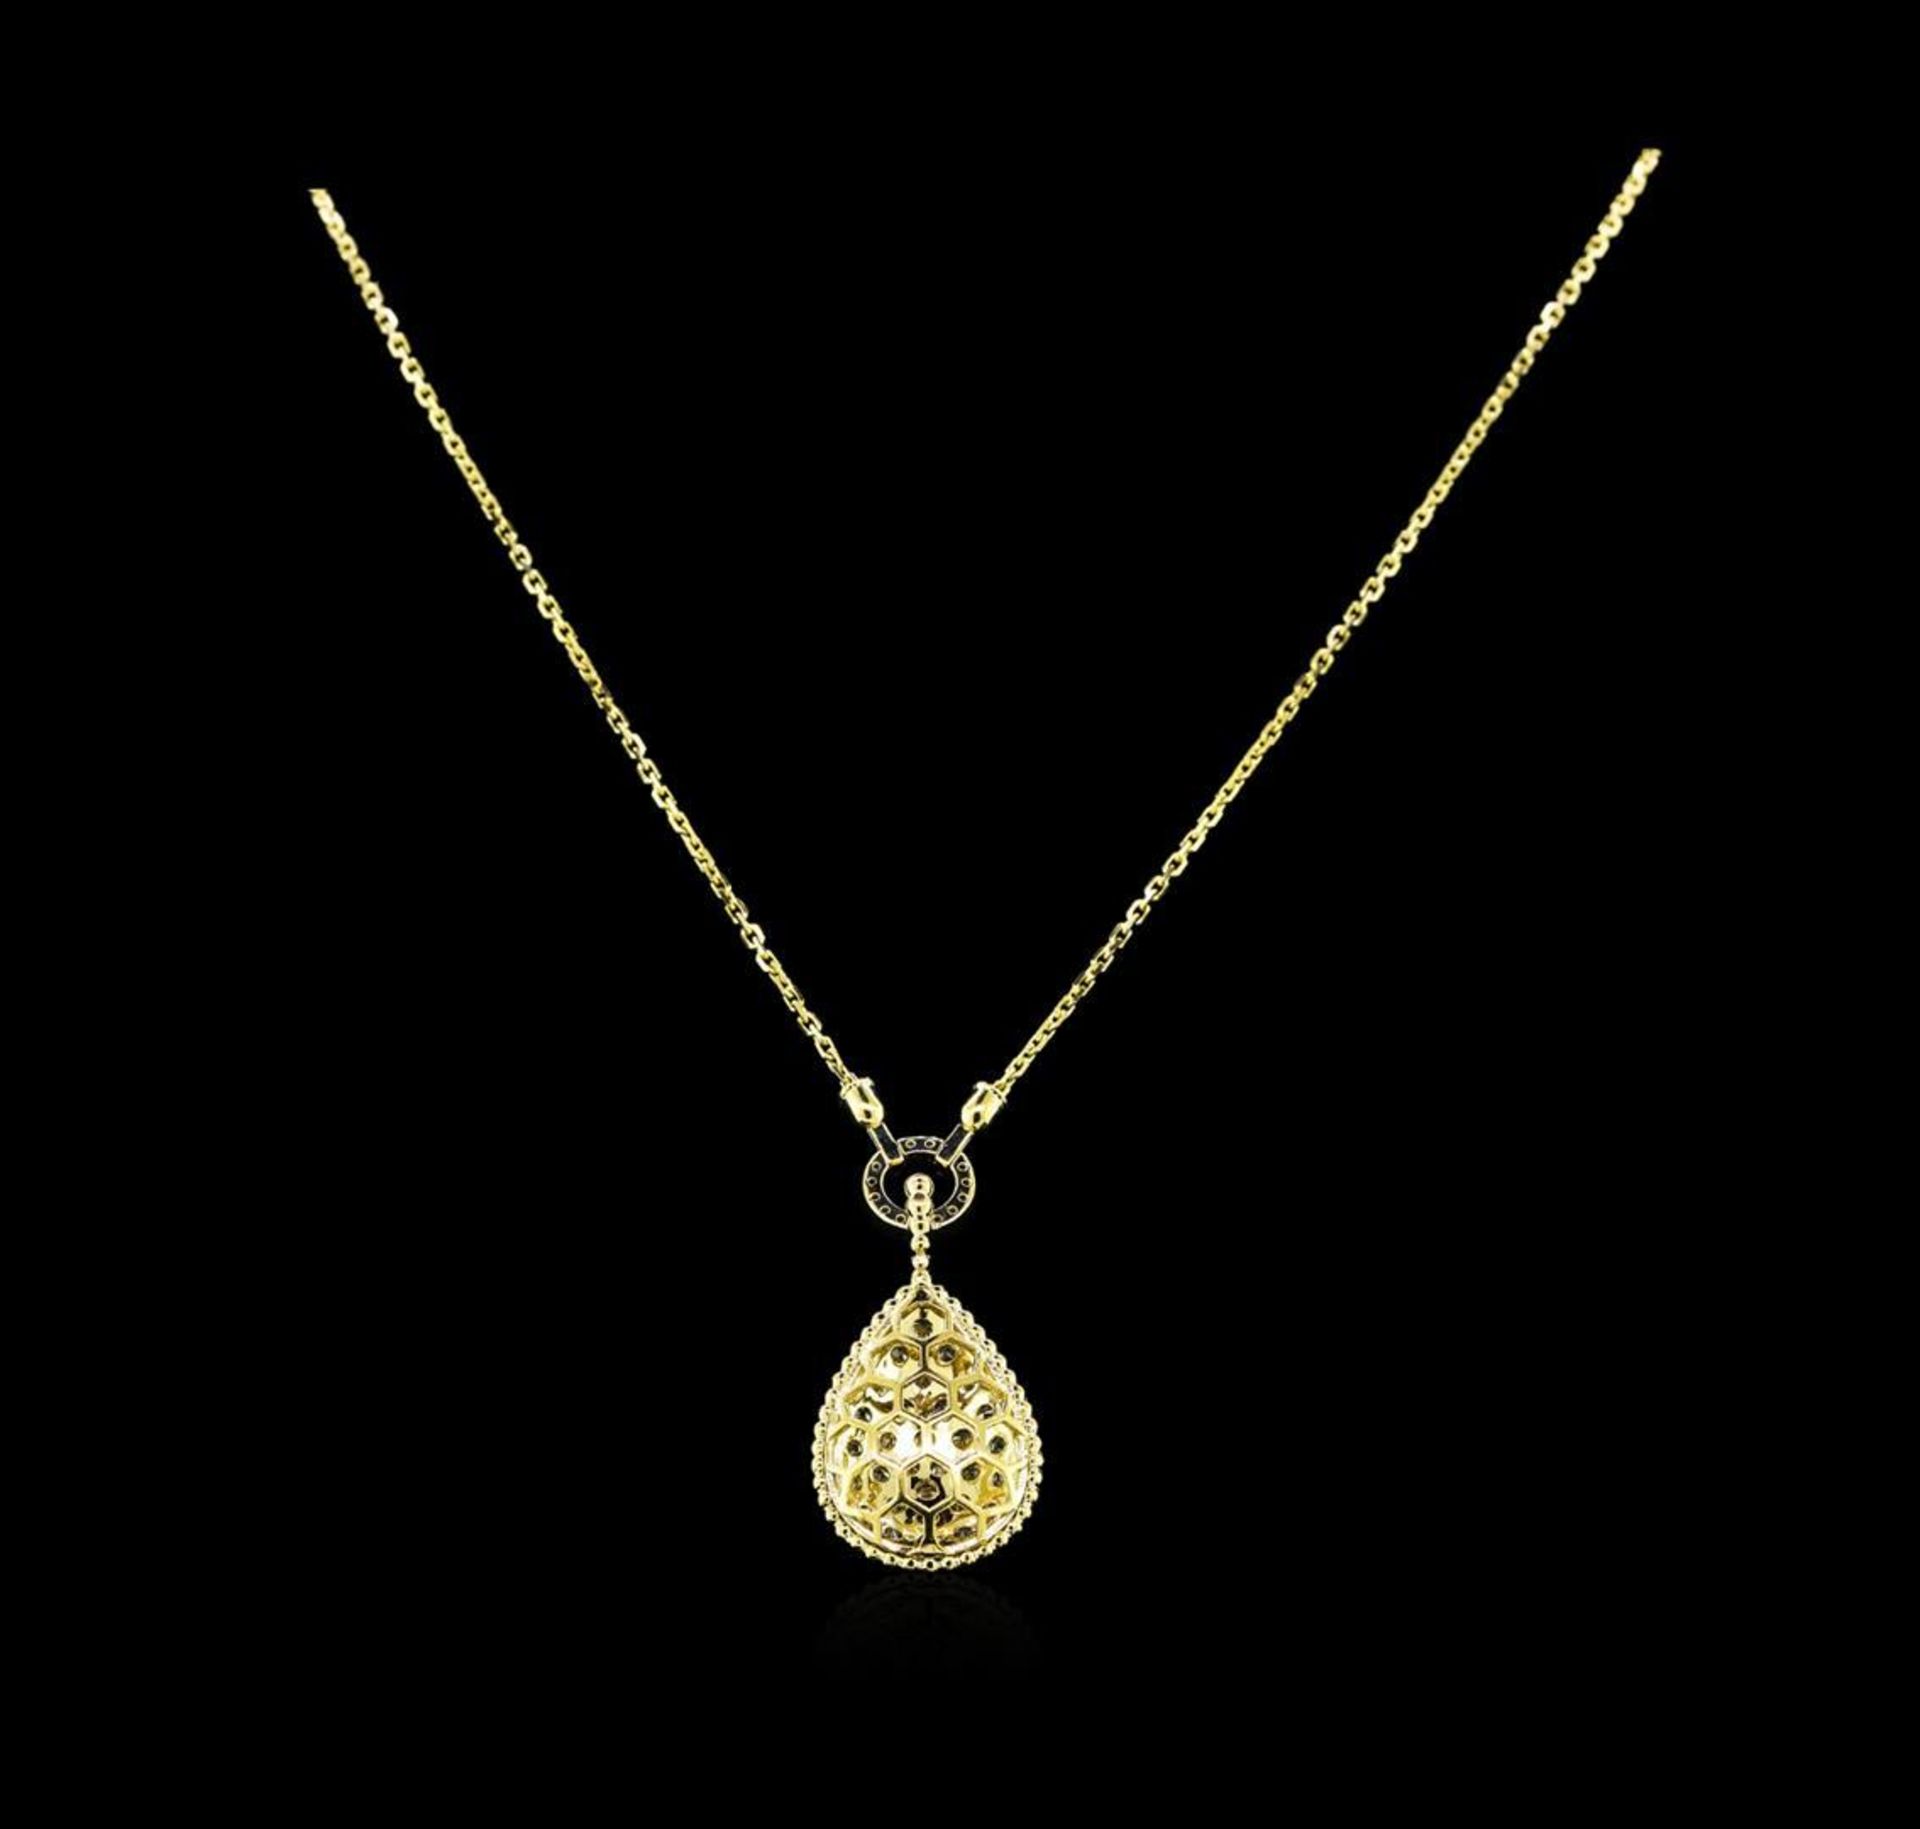 2.30 ctw Diamond Necklace - 14KT Yellow Gold - Image 2 of 3